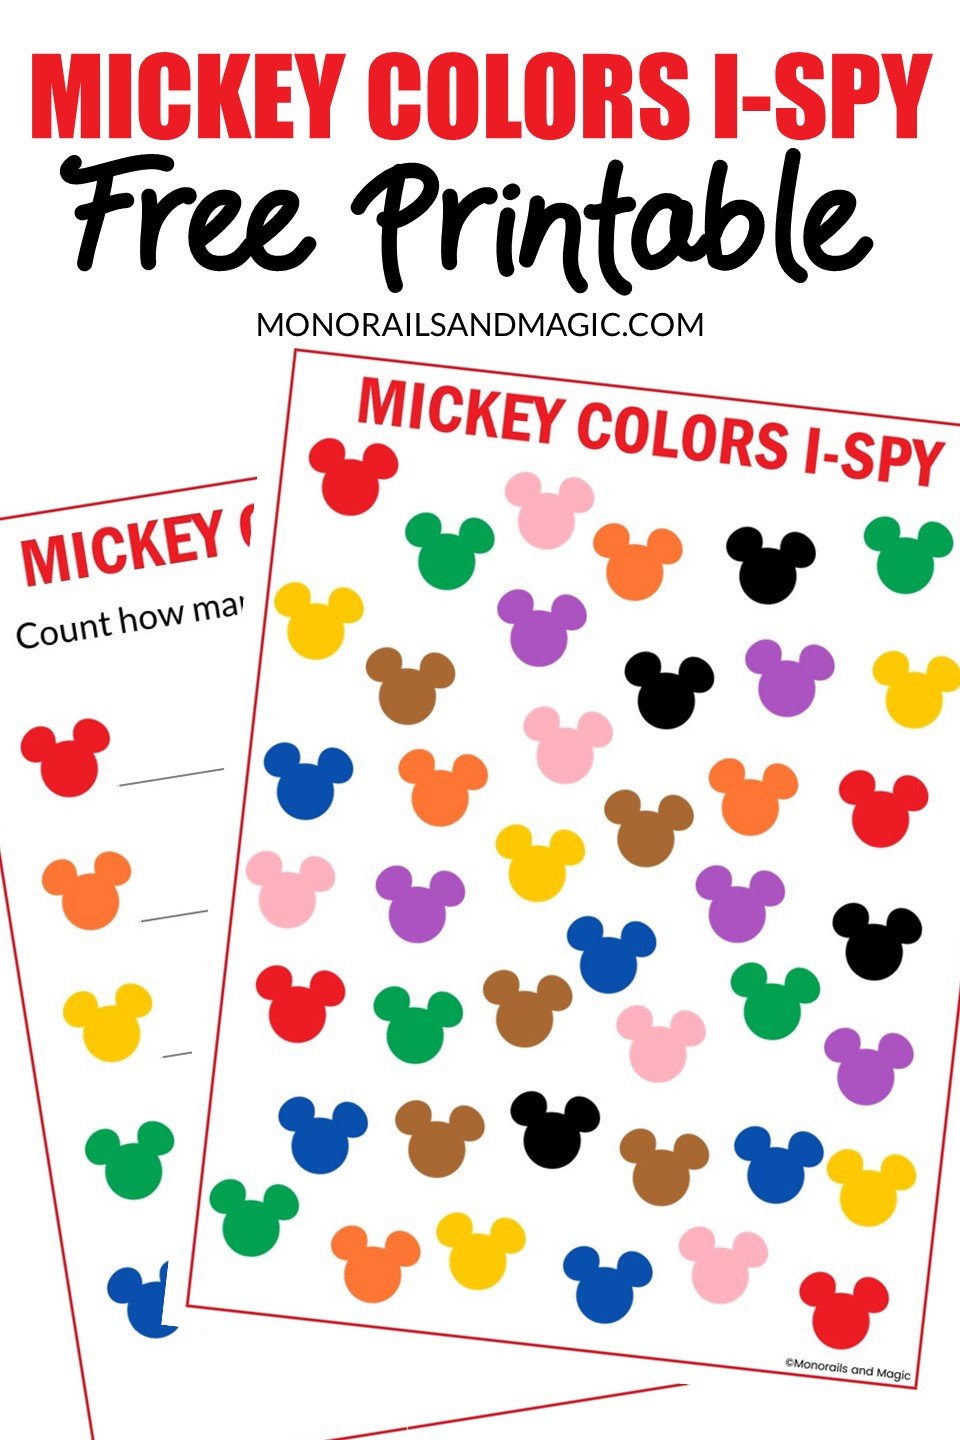 Free printable Mickey colors I-spy activity for children.